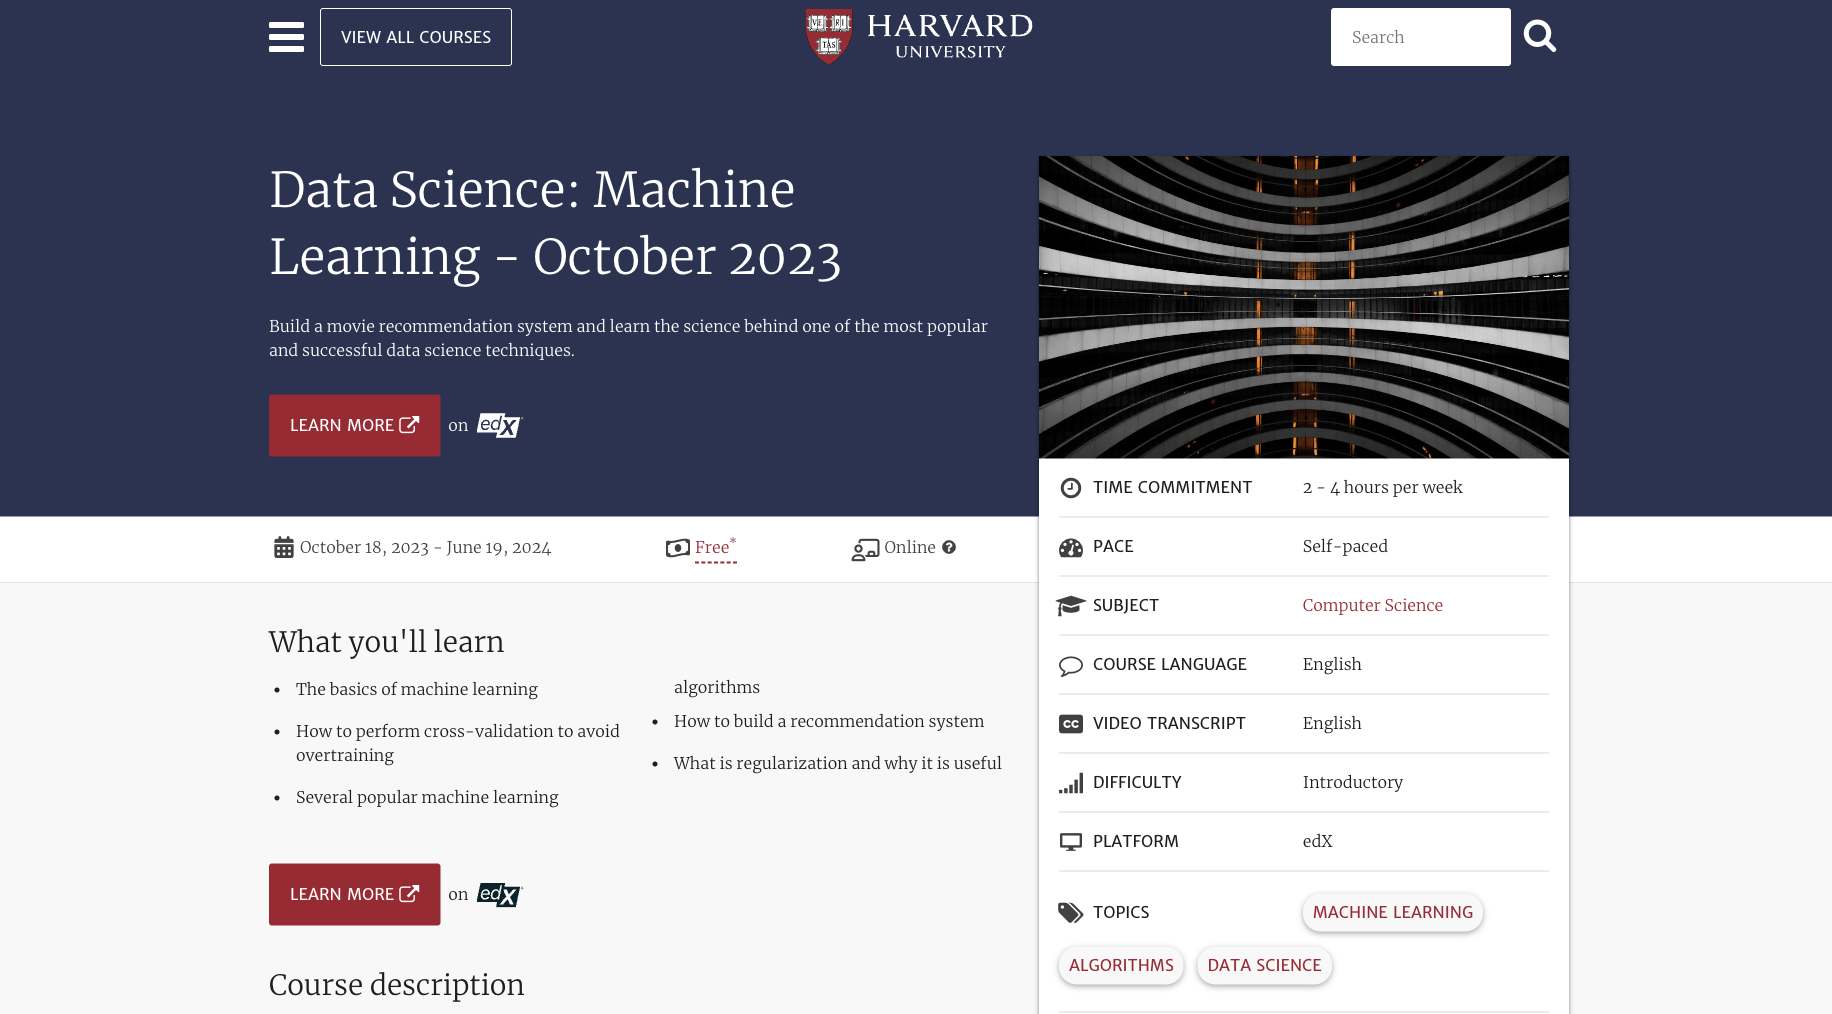 Data Science: Machine Learning by Harvard